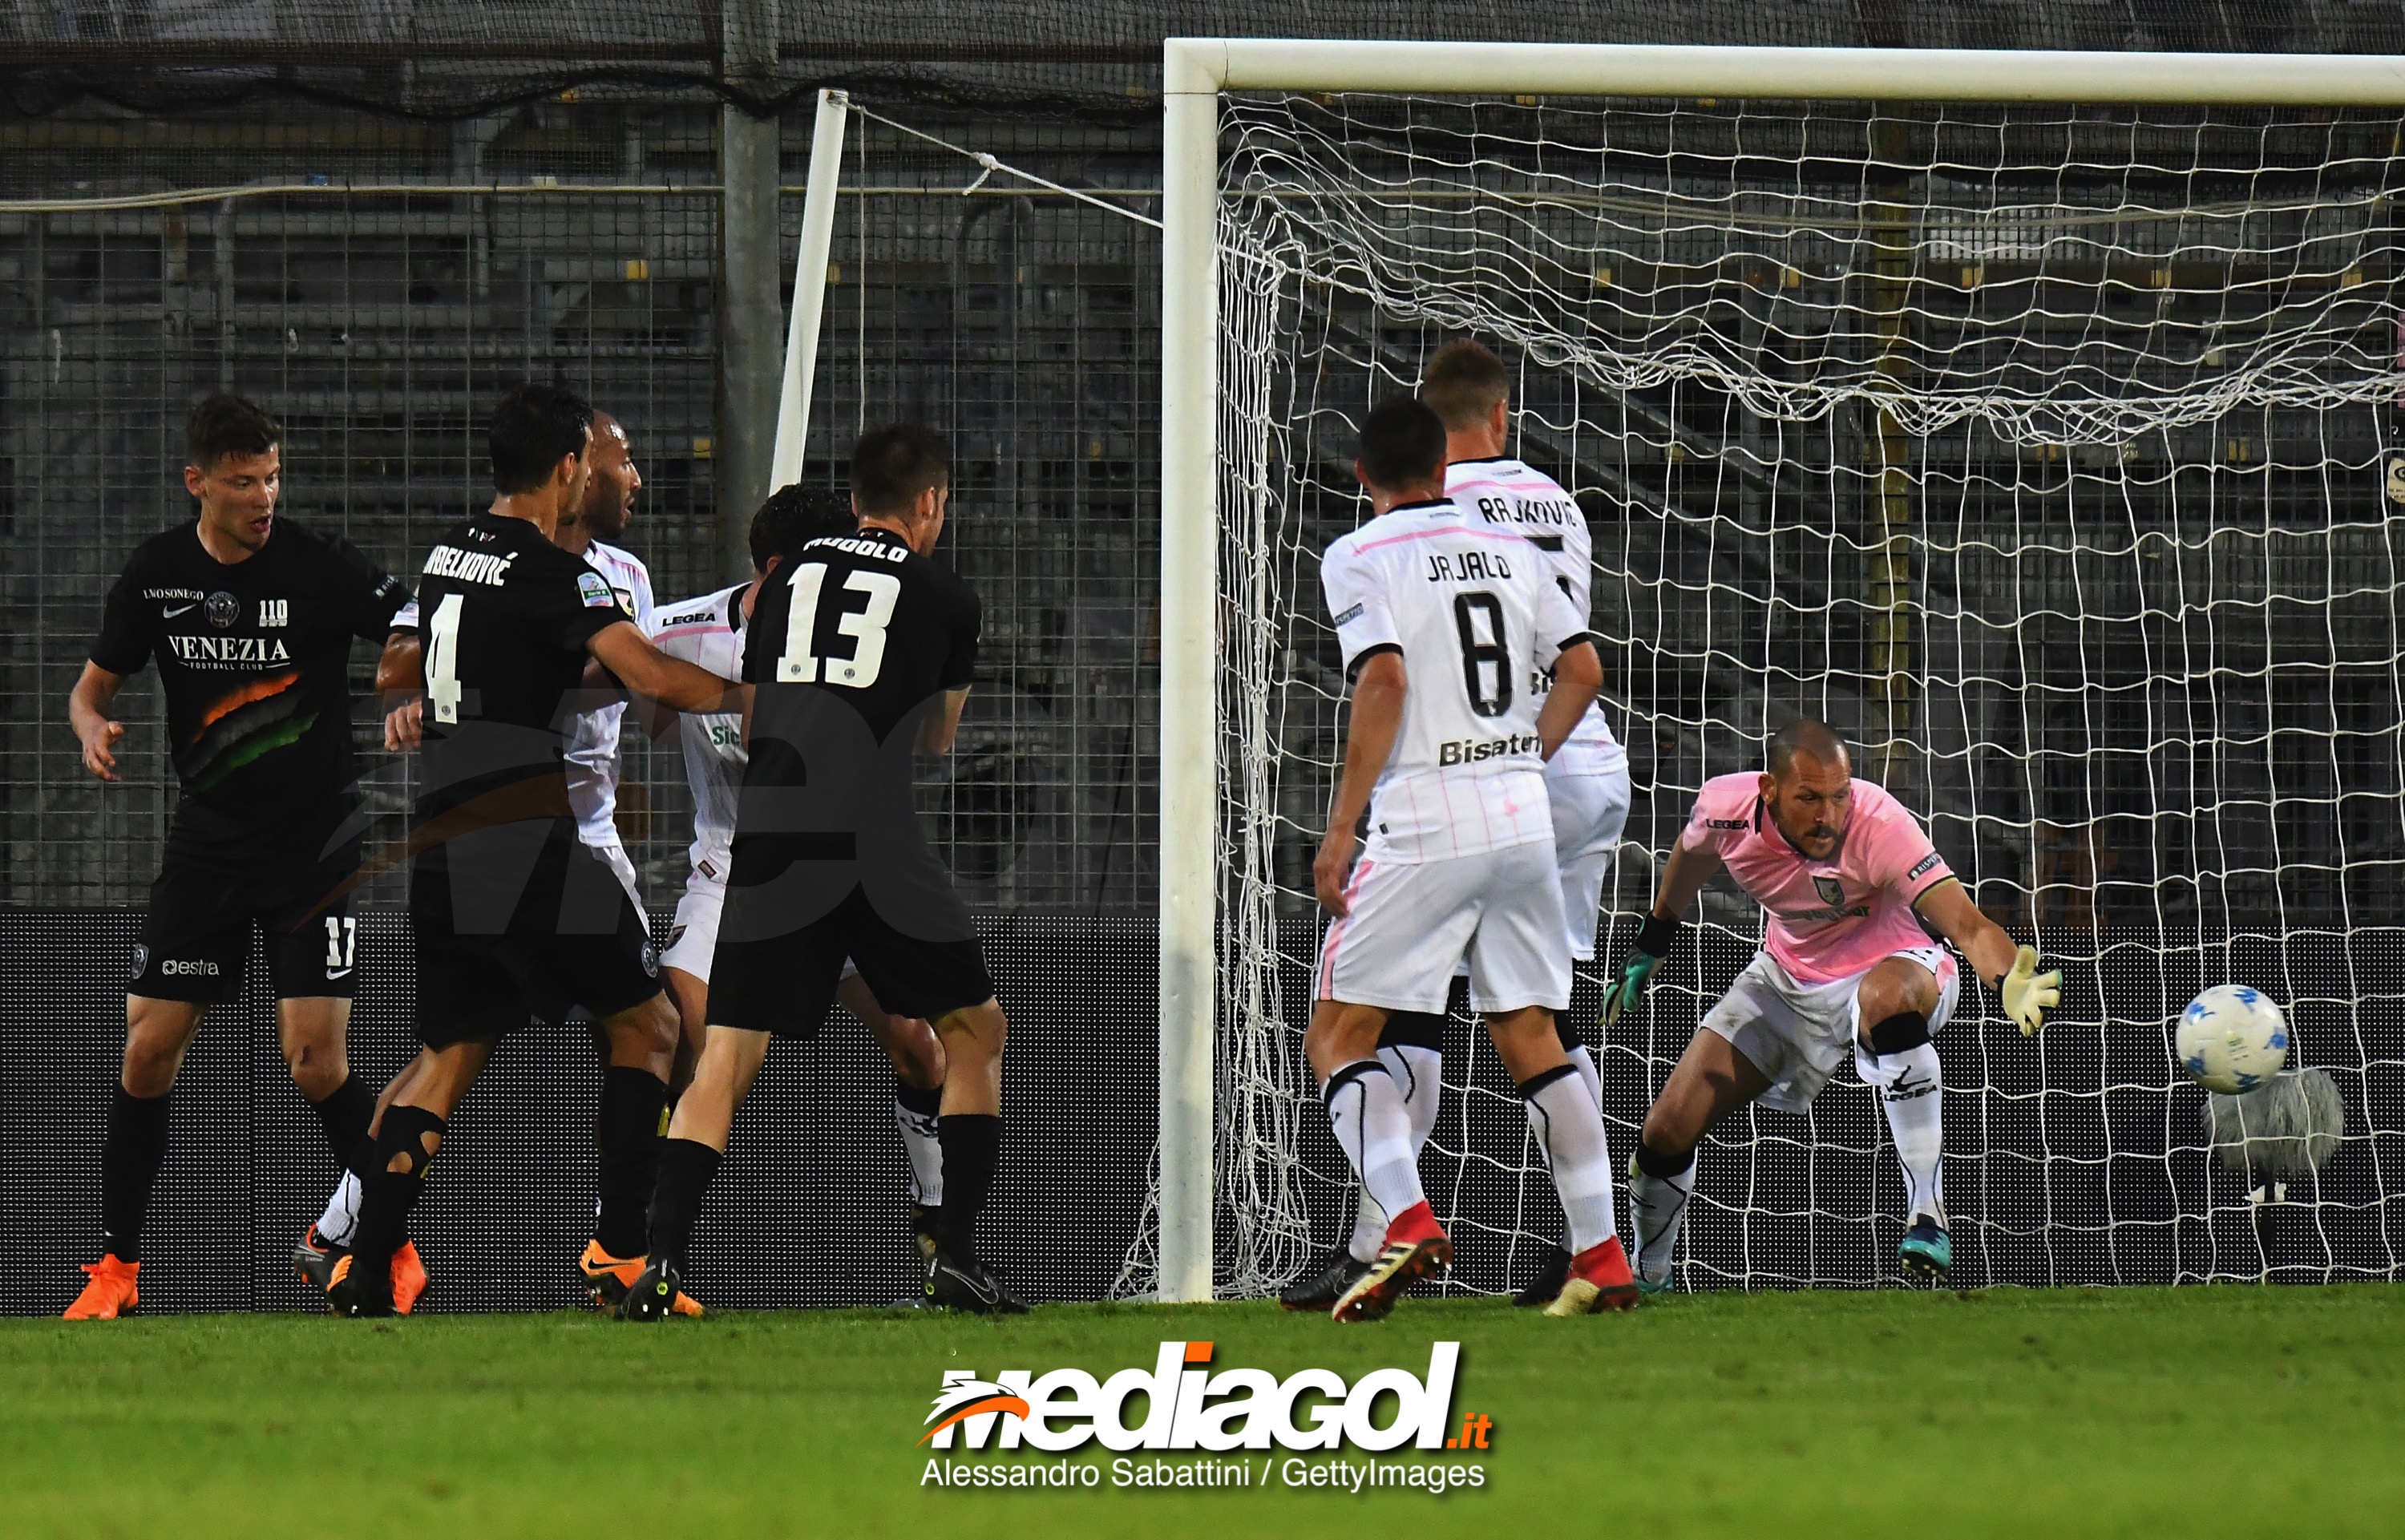 VENICE, ITALY - APRIL 27: Sinisa Andelkovic of Venezia FC scores his team third goal during the serie B match between Venezia FC and US Citta di Palermo at Stadio Pier Luigi Penzo on April 27, 2018 in Venice, Italy.  (Photo by Alessandro Sabattini/Getty Images)